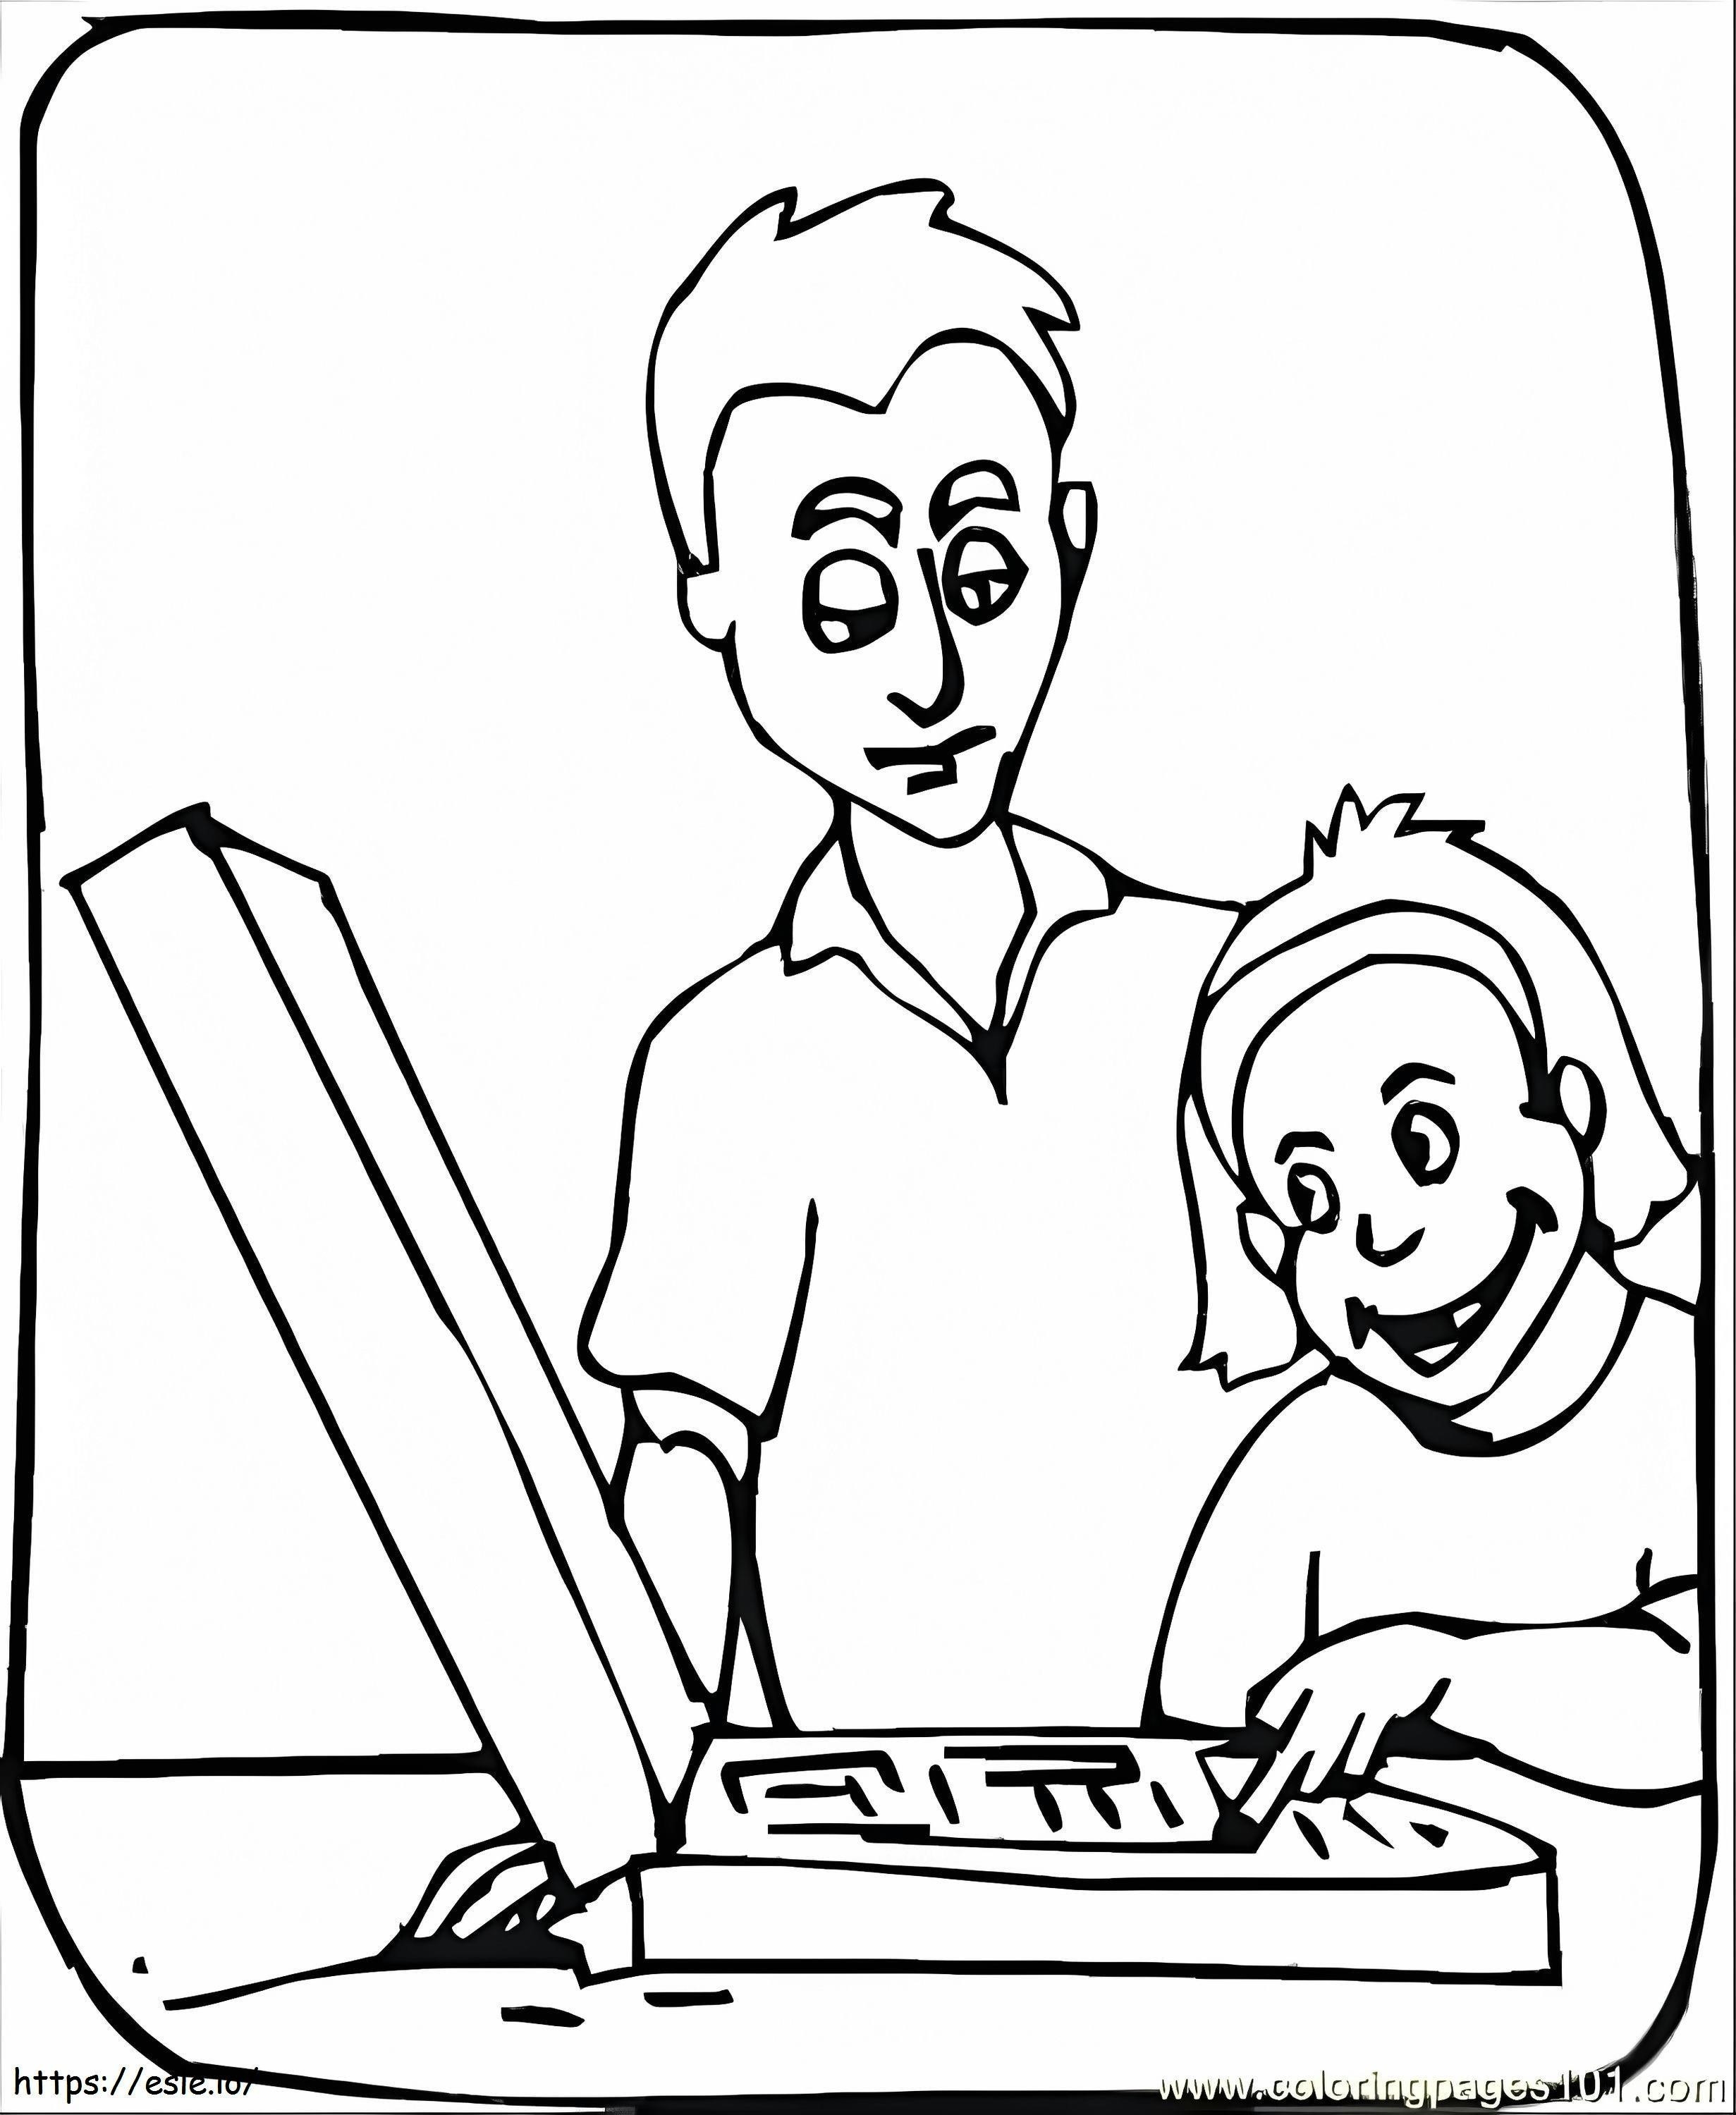 Father Teaching His Son How To Use The Laptop coloring page